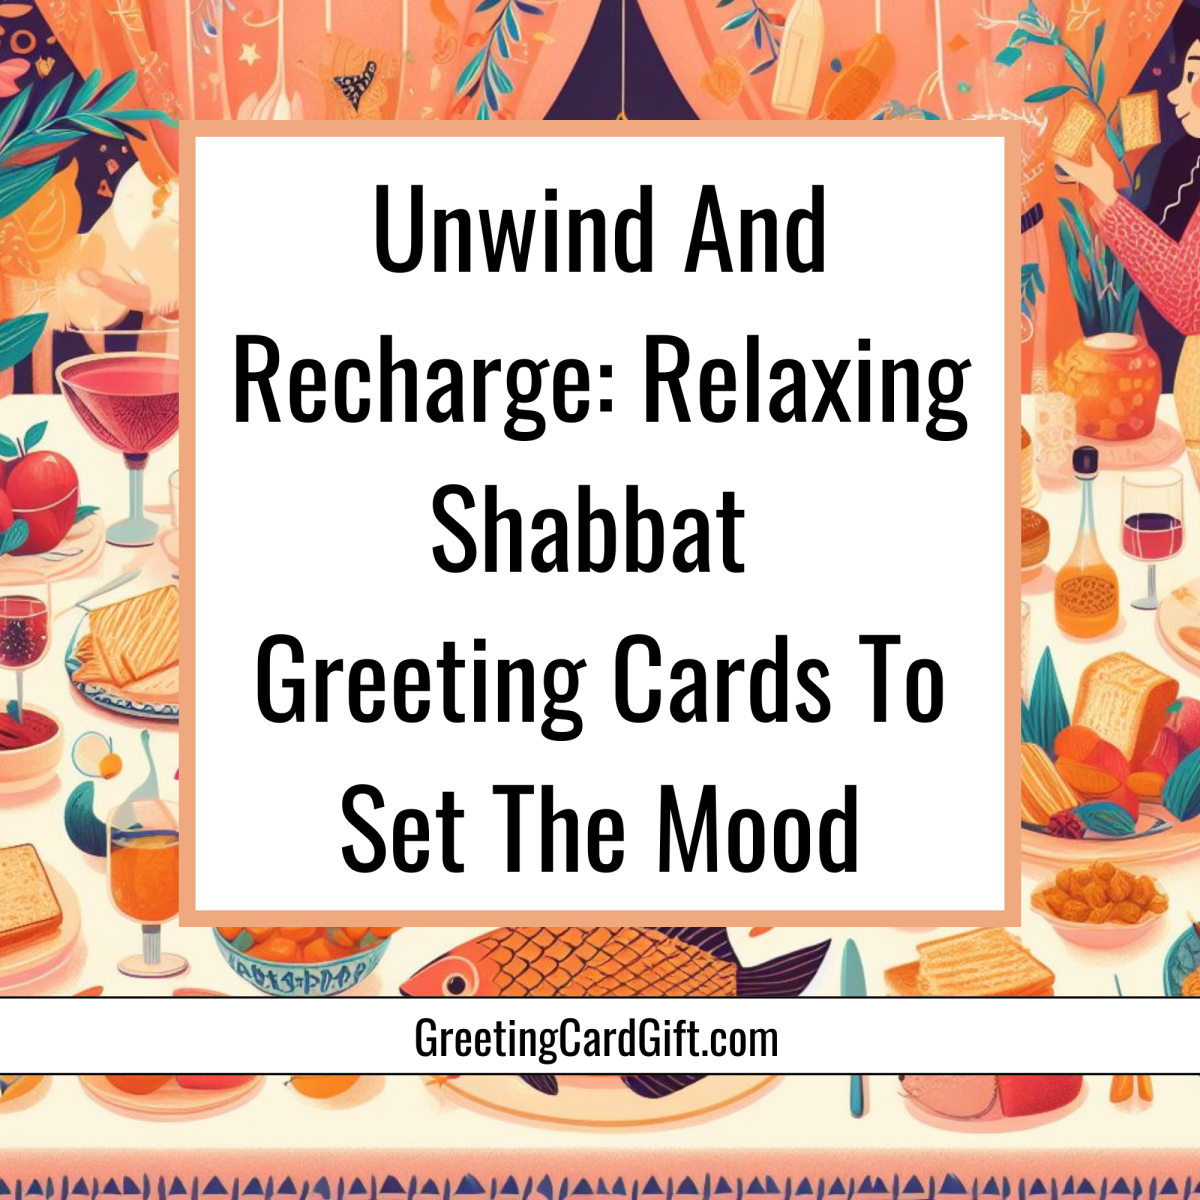 Unwind And Recharge: Relaxing Shabbat Greeting Cards To Set The Mood